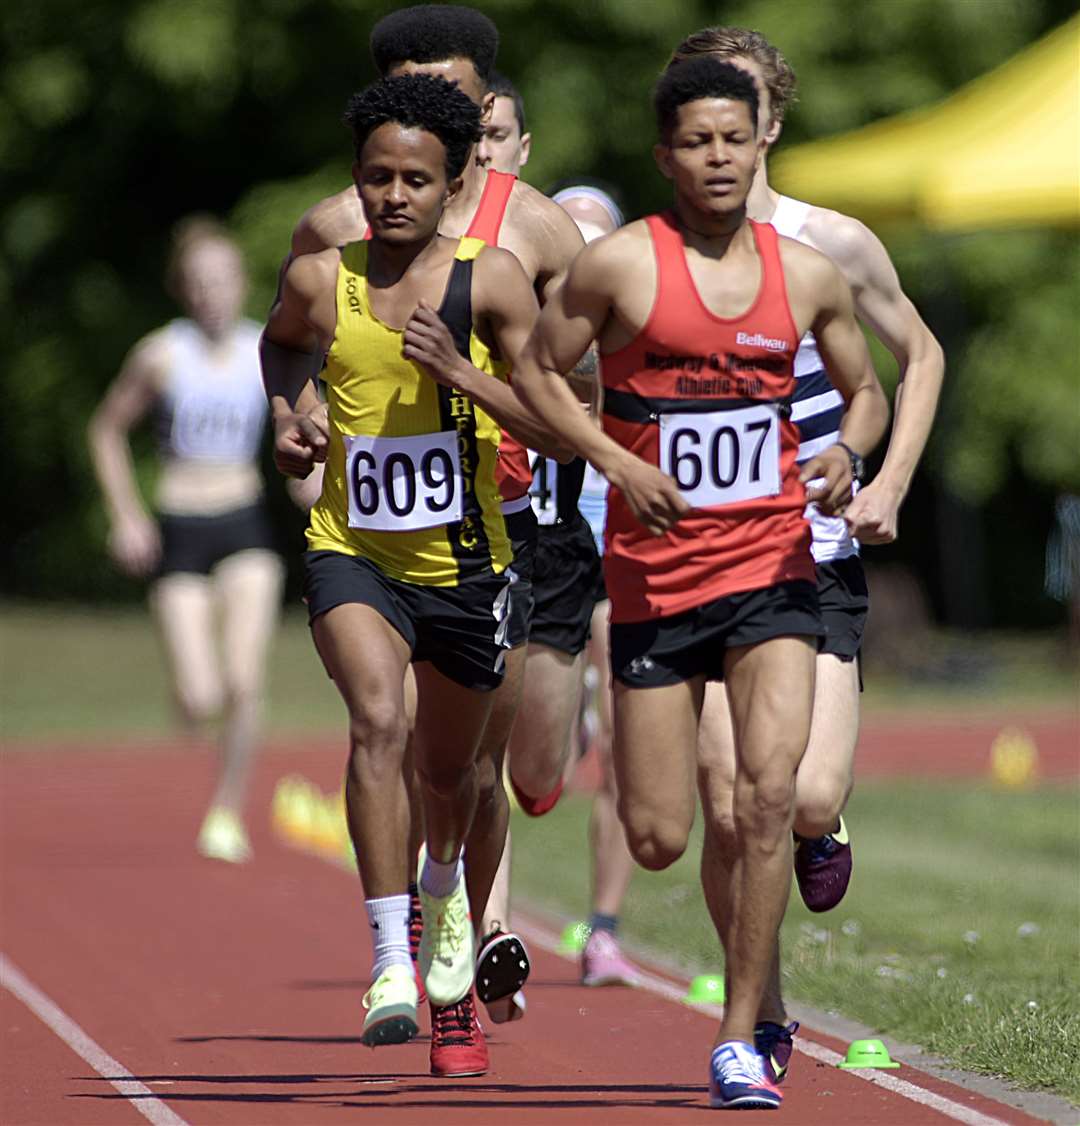 The battle for victory in the senior men's 5,000m final went Wegahta Zerom's way. The Ashford AC under-20 runner (No.609) beat Medway & Maidstone's Teweldebrhan Menges (No.607) by 10sec. Picture: Barry Goodwin (56694489)